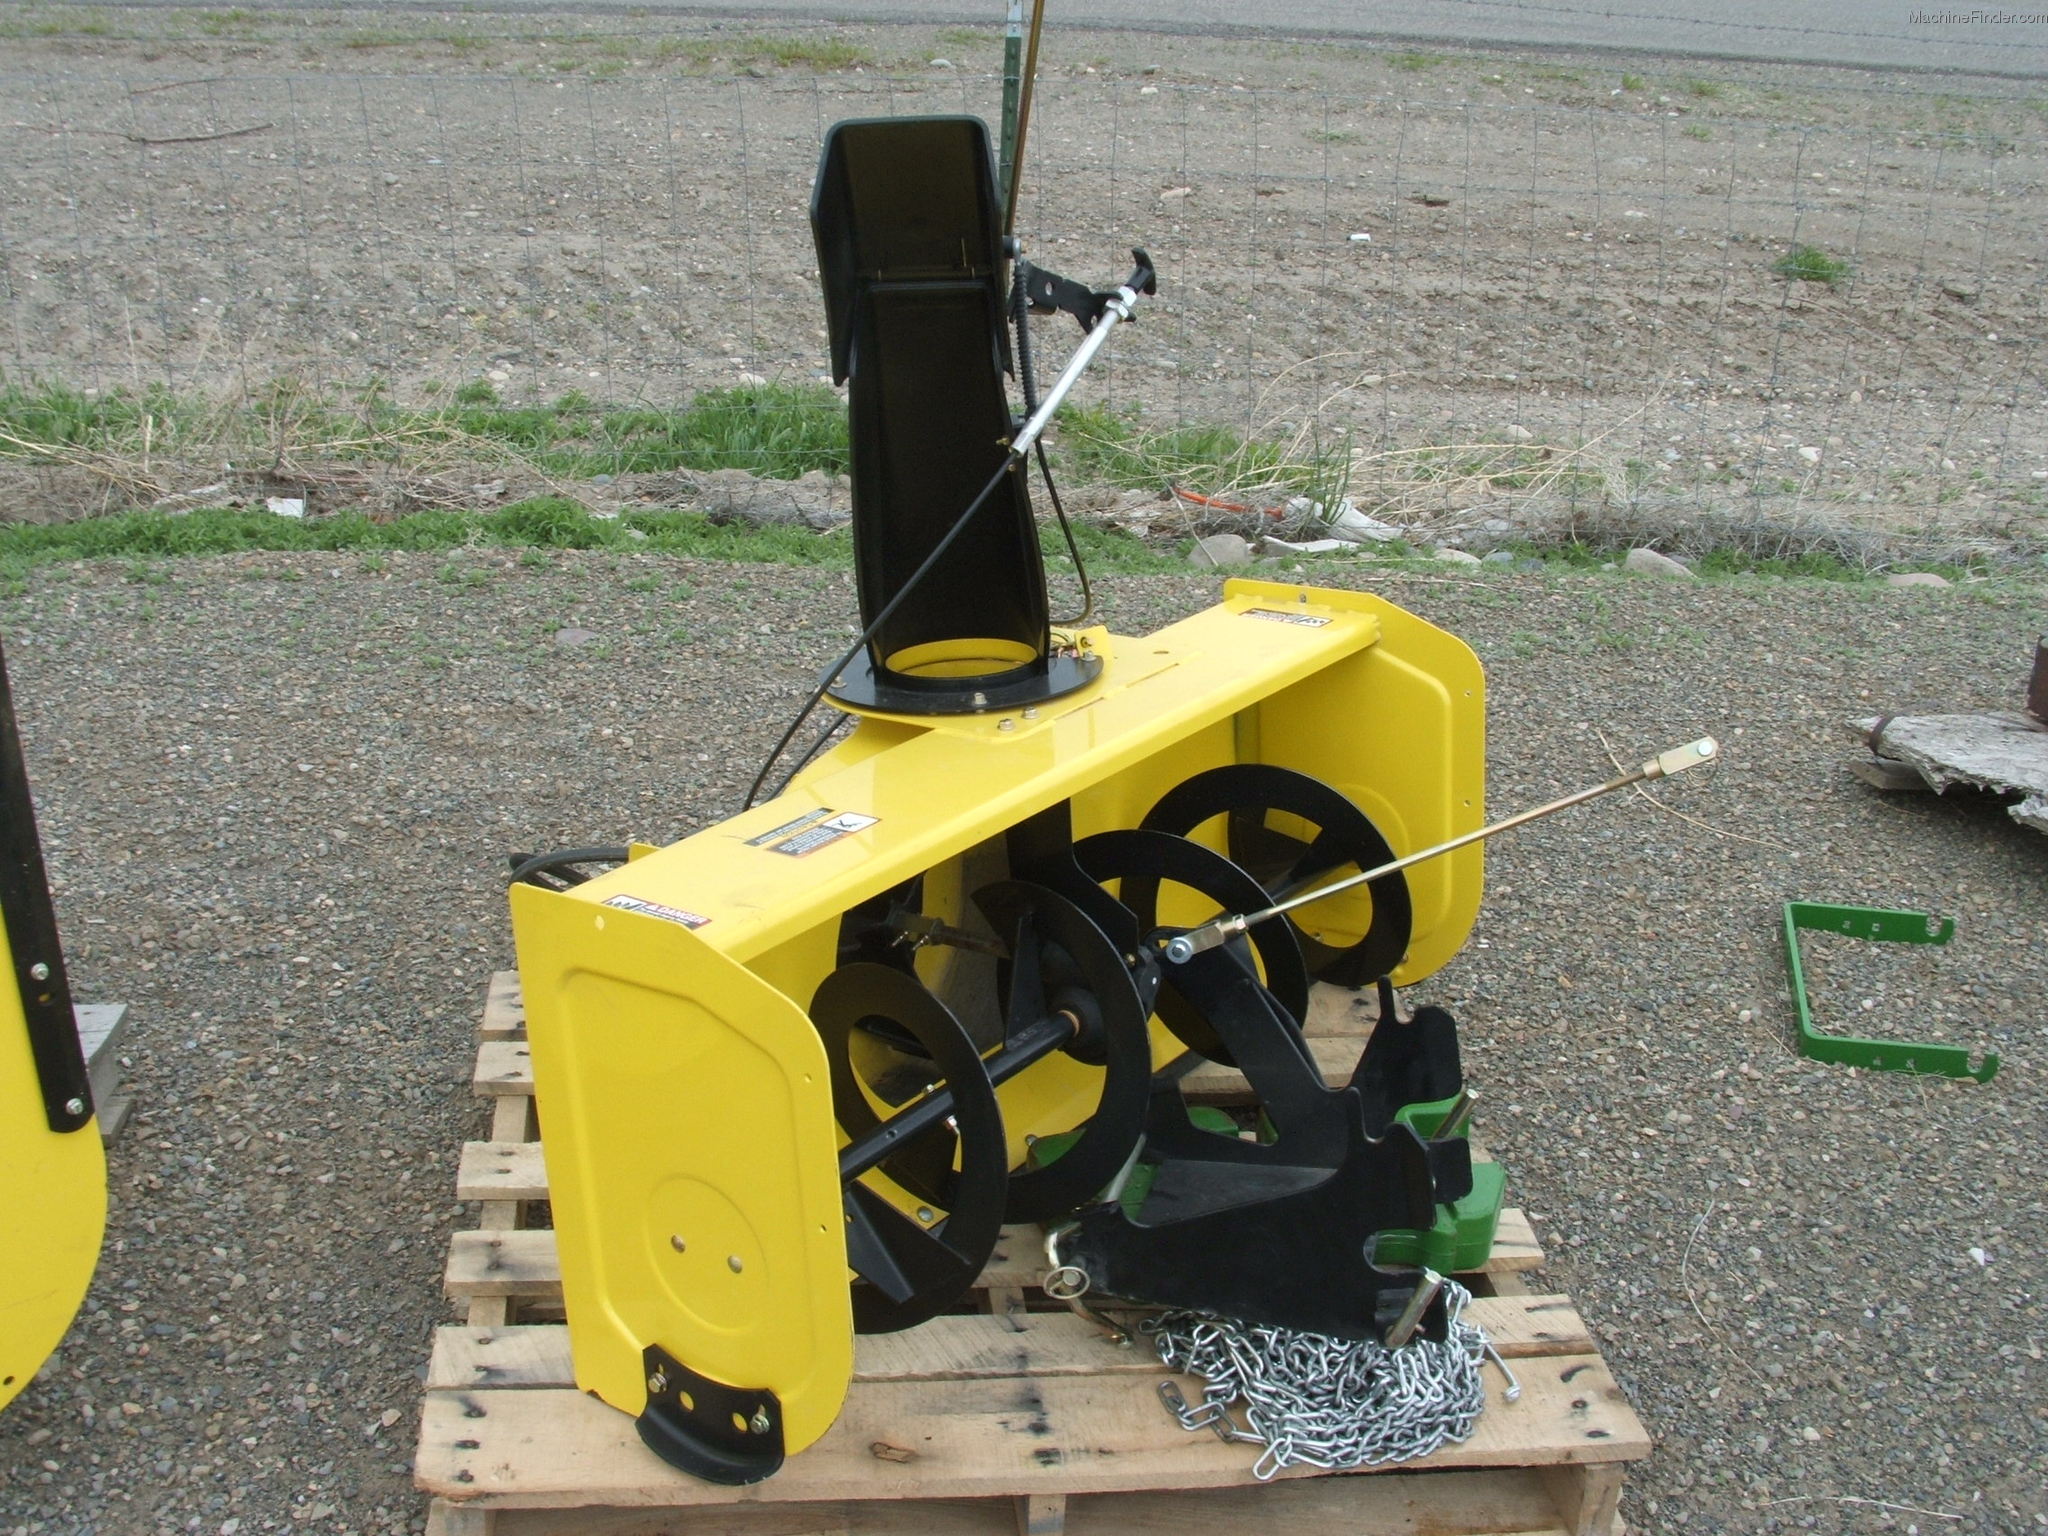 How much are the different John Deere 300 Series snow blower attachments?